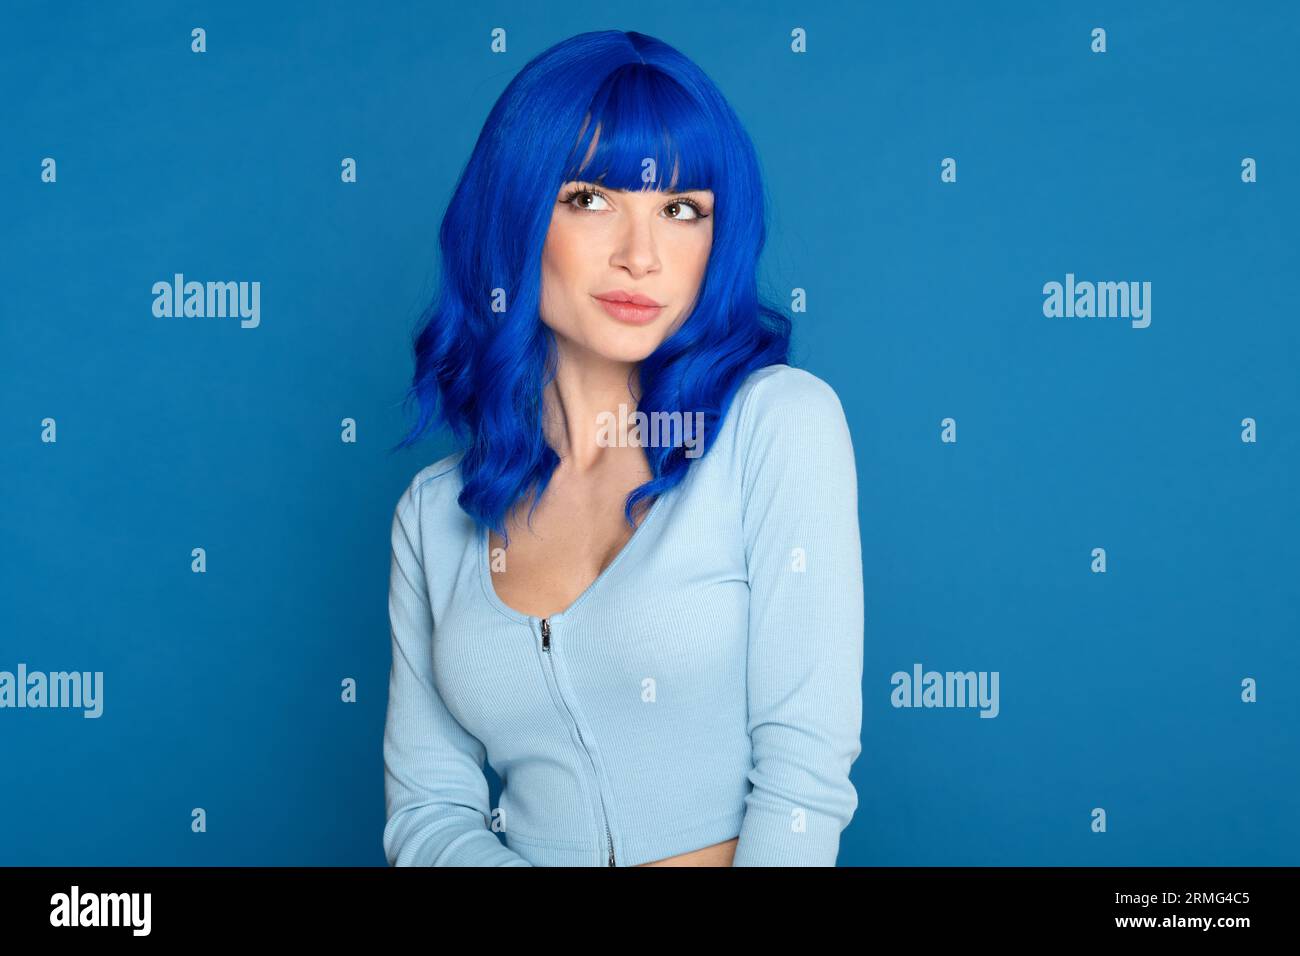 Confident young female model in blue bright wig and casual wear looking away dreamily against blue background in studio Stock Photo